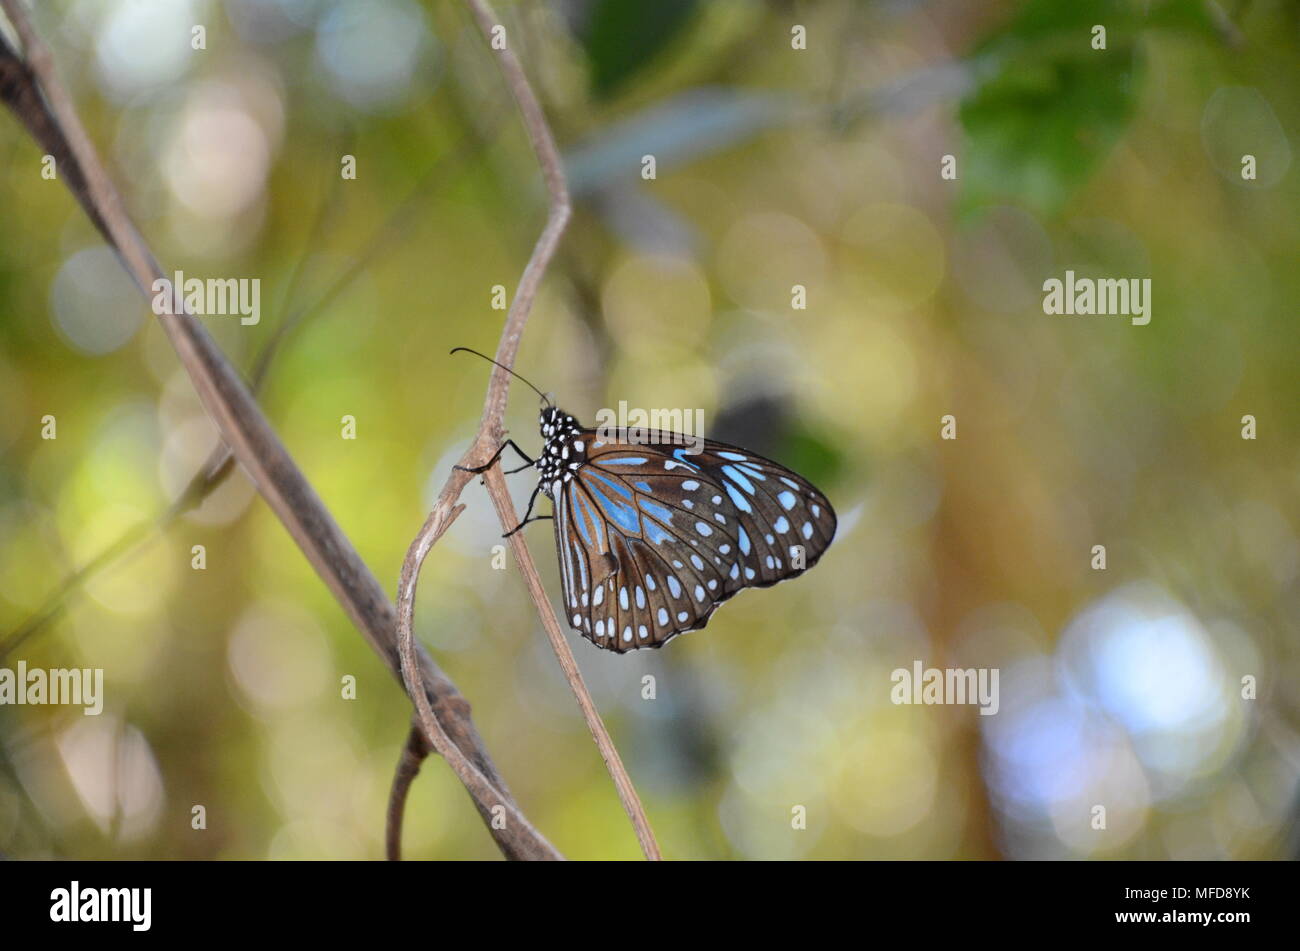 Tirumala limniace, the blue tiger butterfly, magnetic island Stock Photo